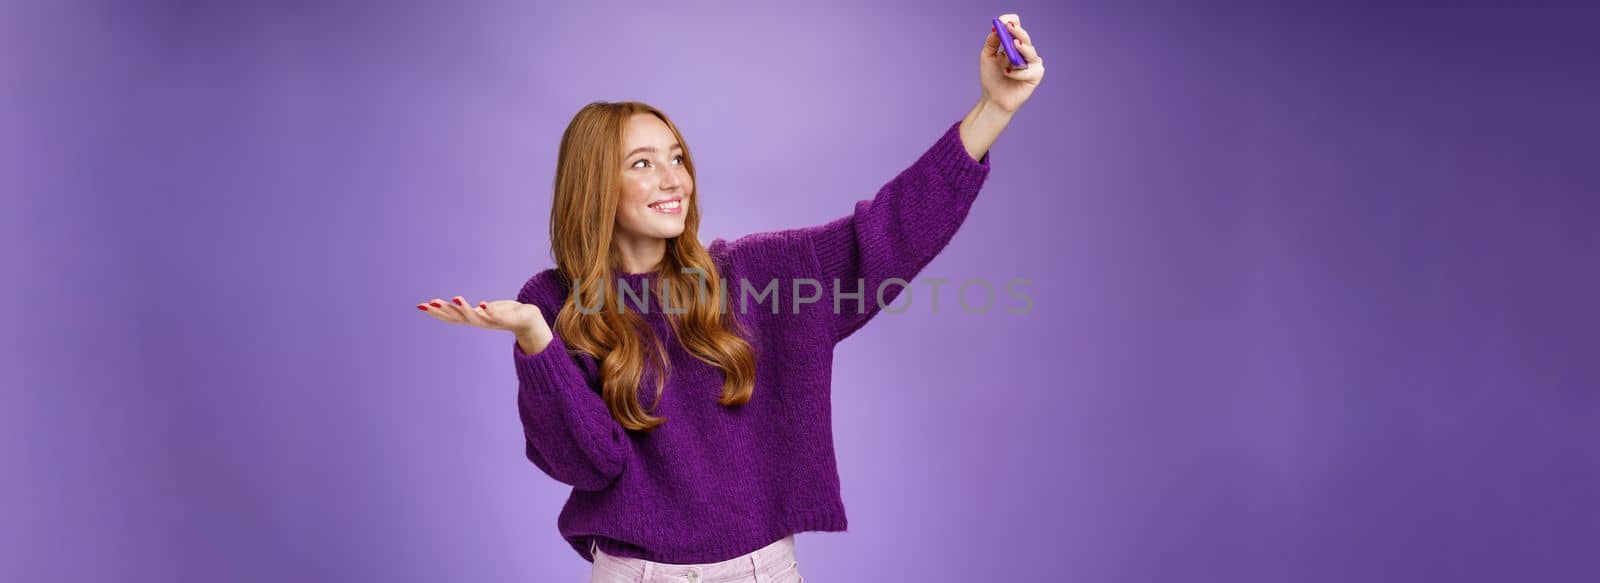 Portrait of cute redhead girl on vacation taking selfies near sightseeing raising hand as if holding builting on palm or showing cool place as taking photograph with pulled arm and smartphone. Technology and travel concept